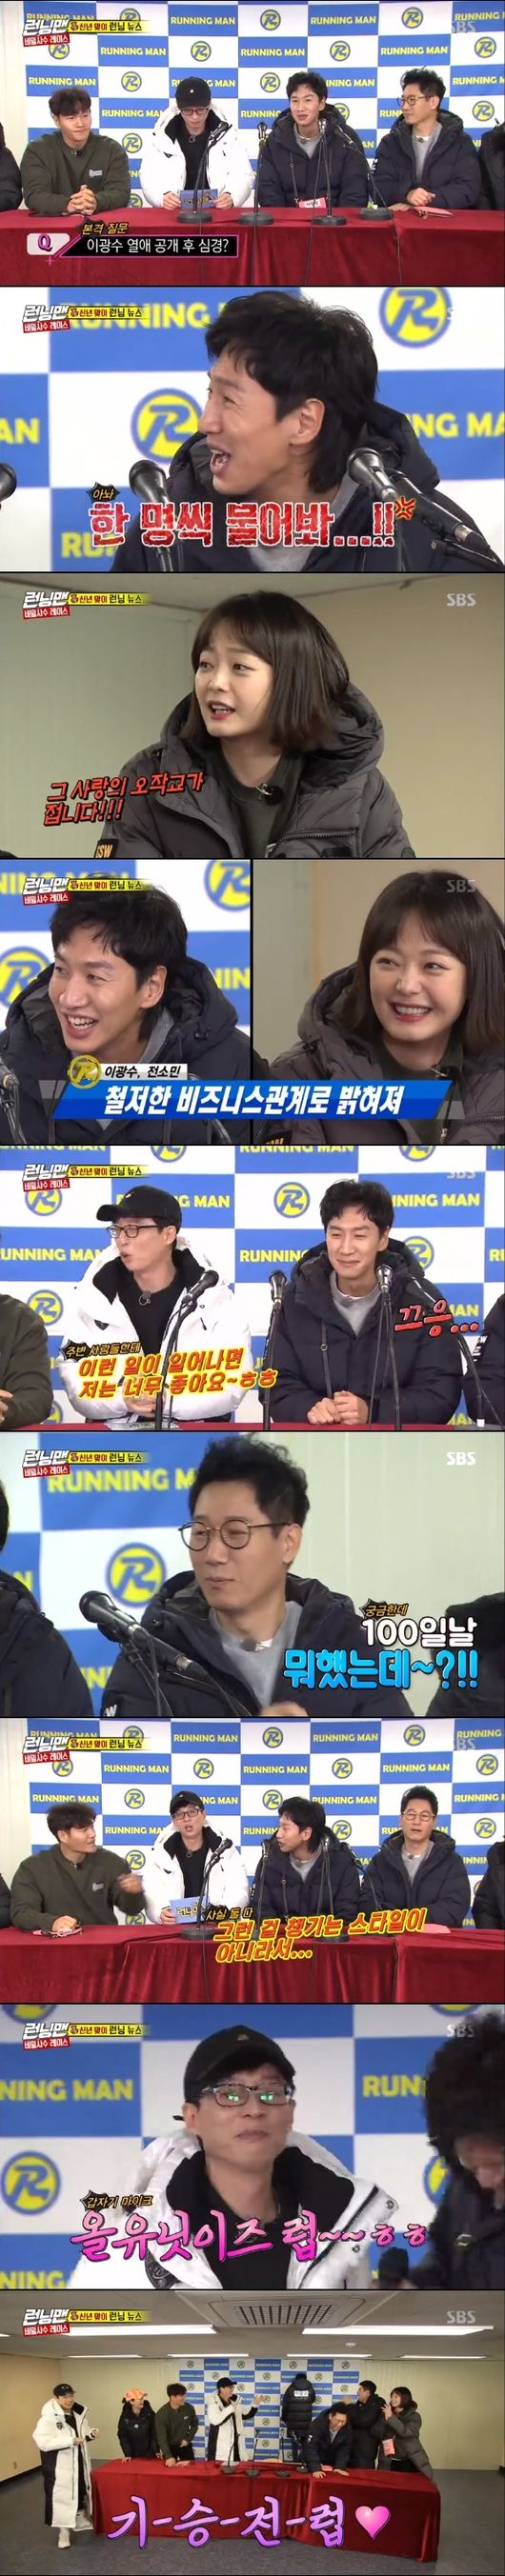 Running Man Lee Kwang-soo was ashamed when he mentioned his devotion to Lee Sun-bin, and the fact that Jean So-min was a love erratic was revealed.On SBS Running Man broadcasted on the afternoon of the 13th, Lee Kwang-soo was shown confessing his heart after admitting his love affair with his lover Lee Sun-bin.Yoo Jae-Suk, Kim Jong Kook and Haha have asked questions such as How do you feel after the release of your devotion?, So are you dating? And How much do you love?Lee Kwang-soo said, Ask one by one, let me deal with one, and Jean So-min said, I want to be proud of something.I gave him the number, Haha said, adding that Jeon So-min, Lee Kwang-soo were the perfect business couple.Yoo Jae-Suk said, I do not see Running Man, but there may be viewers who see it because of this today. Lee Kwang-soo intercepted the words, and the members dried Yoo Jae-Suk.Haha laughed, saying, Jae Seok is excited, and Yo Jae-suk said, Its so good if this happens around.Haha asked, Lee Kwang-soo had a character who was a bully, what are you going to do next? and Jean So-min said, Ill try that character once.Ji Suk-jin asked, What did you do with Lee Sun-bin on the 100th? and Lee Kwang-soo replied, Actually, neither is the style to take that.Kim Jong Kook said, If you told me, you would have given me 100 won. Yoo Jae-Suk promised, We will collect 700 won later.Yoo Jae-Suk said, What love will you love in the future?When asked, Lee Kwang-soo said, Many people have been interested and cheered. At this time, he opened his mouth again.Ji Suk-jin said, Lets listen to the light, I did not hear a word about her.Yoo Jae-Suk said, After a couple of days, people are not interested. Suddenly, I laughed at the love song All You Need Is Love.Lee Kwang-soo, who usually formed a love line with a female guest in Running Man, changed after admitting his devotion to Lee Sun-bin.On this day, female guest Cheongha and Doyeon appeared, and Haha asked for the transition, saying, If you had come out before, the Gwangsu would have been really hospitalized...Lee Kwang-soo used the name of Qingha to give a selfless fulfillment poem called Cheonggukjang, Hanyo.Kim Jong-guk said, Now Im completely down, and Yo Jae-Suk laughed, You can put down love like that.Just before the last quest Shoe Freedlow game, Running Man members helped with one word, saying, Love Giraffe, Lets see the power of love somewhere and It will be all when it becomes love.Lee Kwang-soo declared that he would not be able to play the game, and the members laughed at Lee Kwang-soo while laying on background music.On the other hand, Lee Kwang-sooLee Sun-bin, who appeared in Running Man and made a relationship, acknowledged his devotion on December 31 last year, and both agencies officially said Running Man screen captures